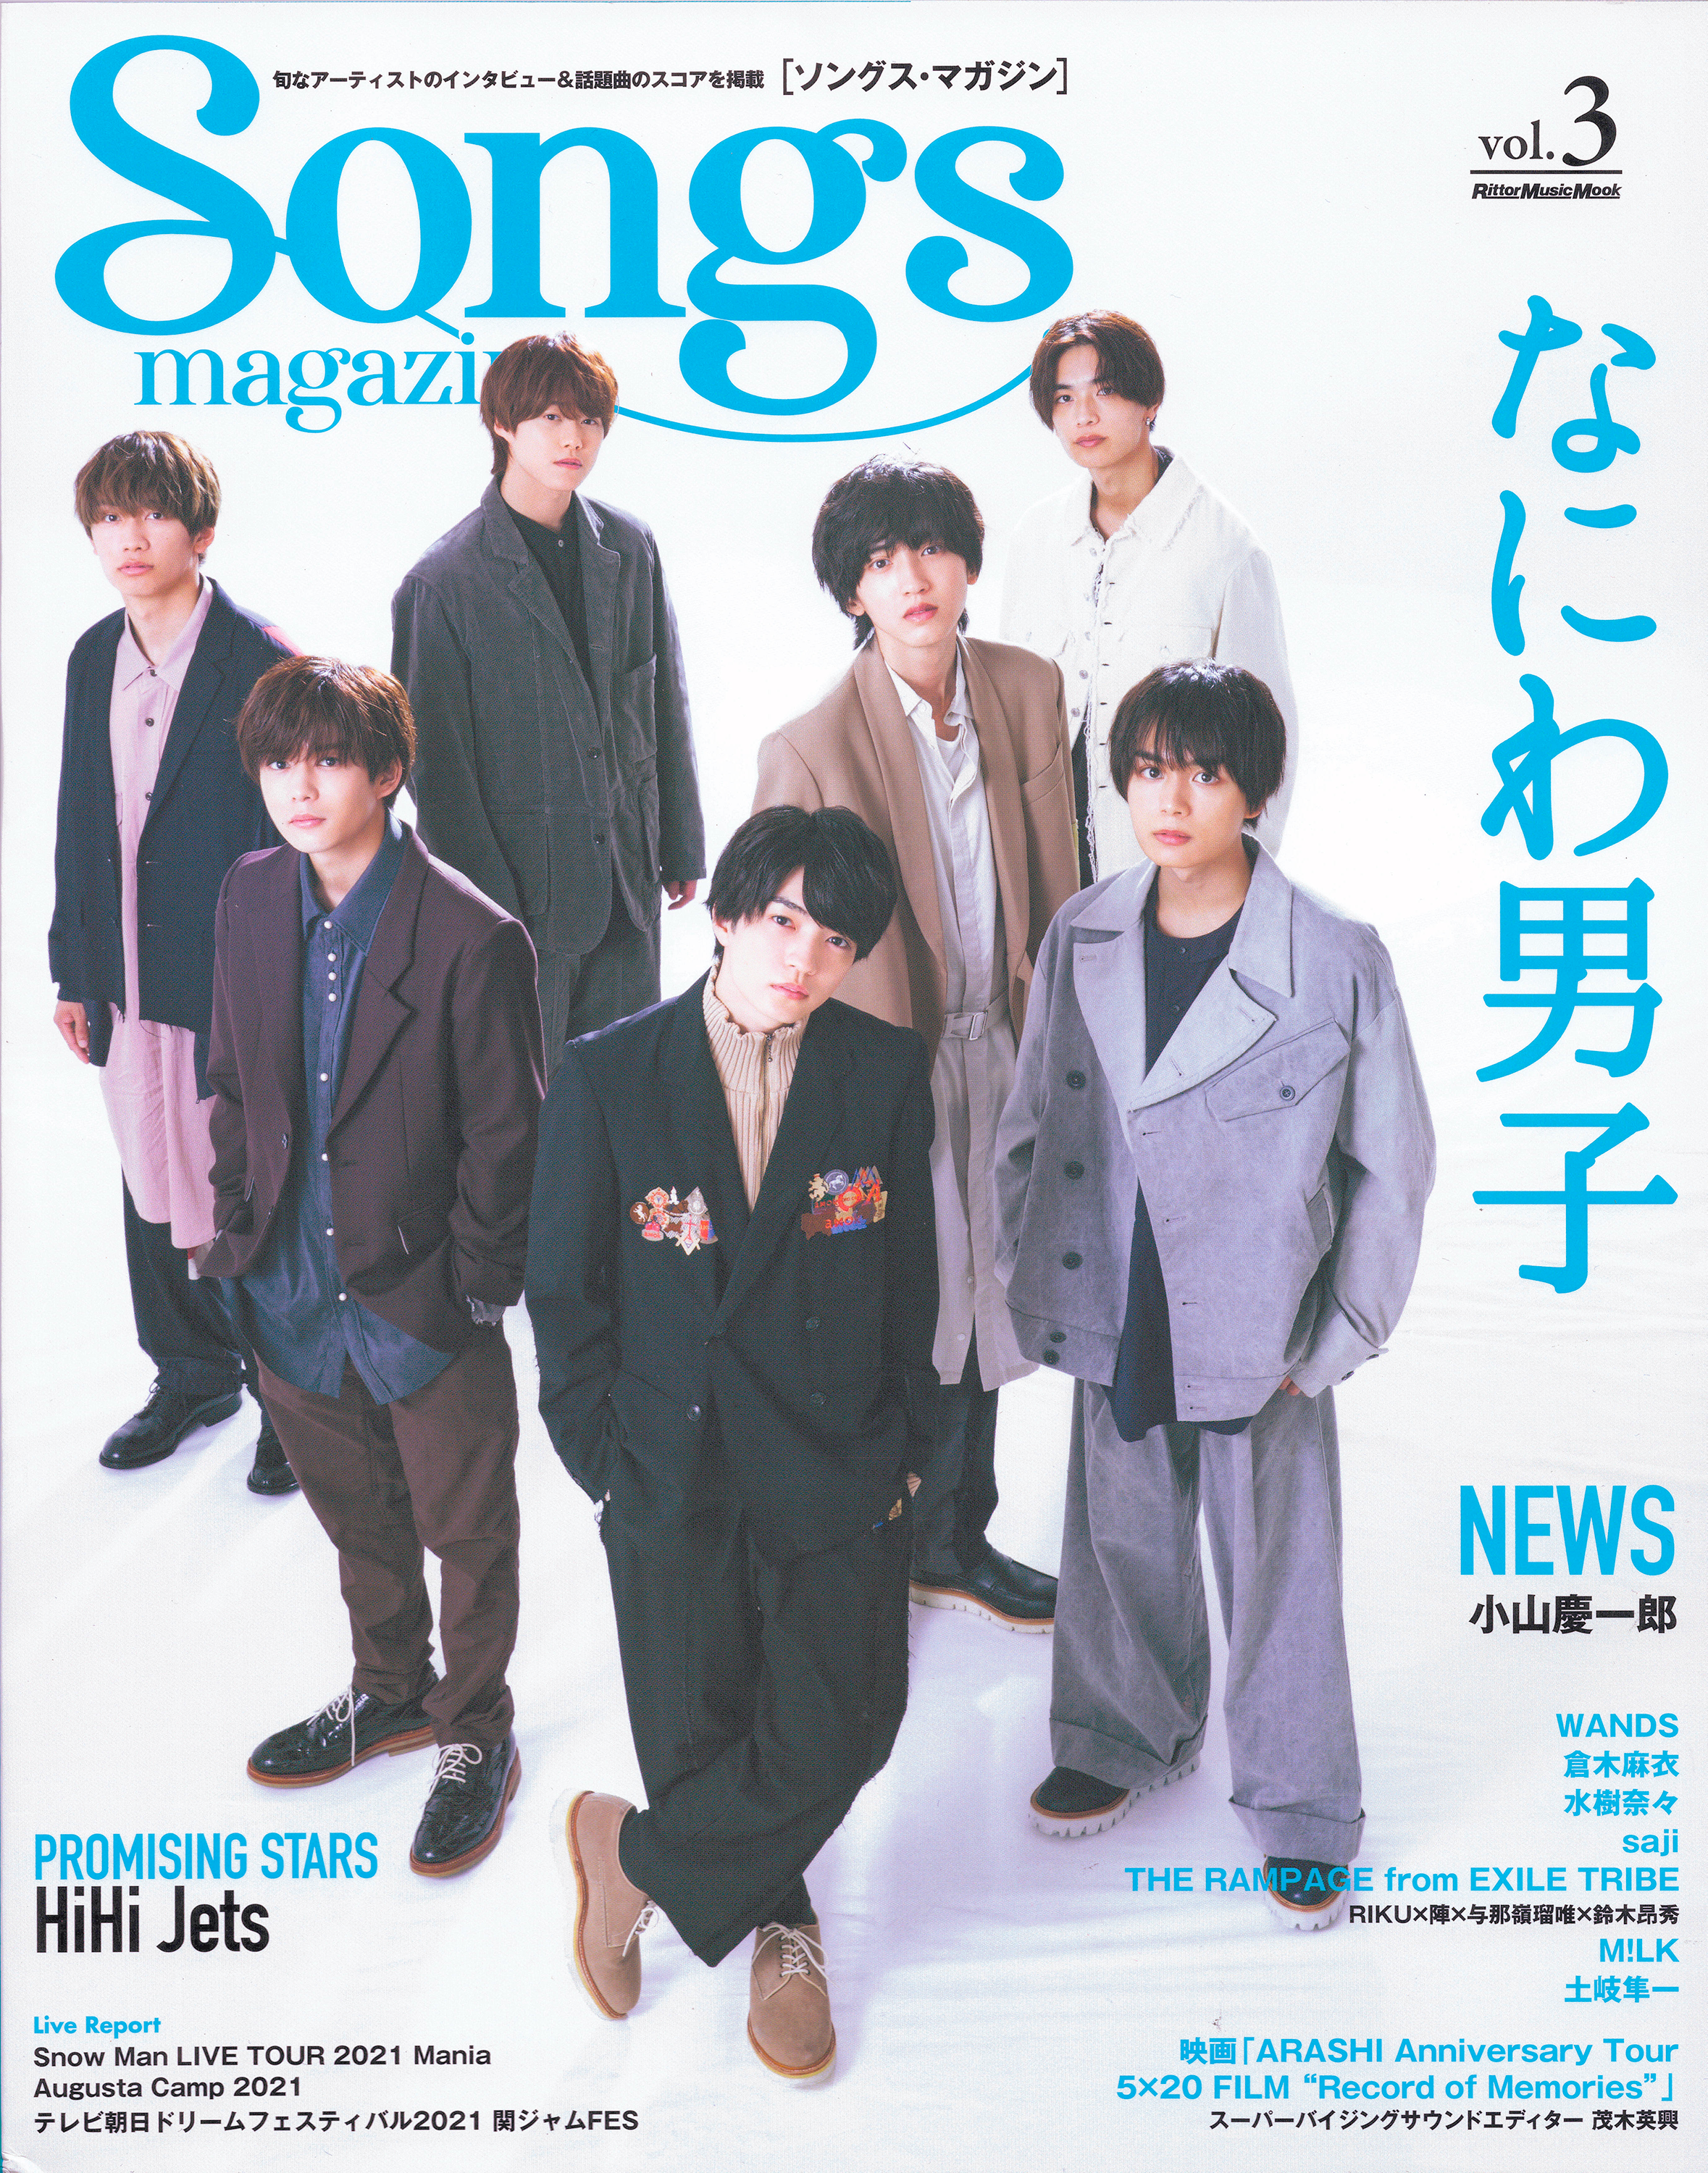 Listed Products on Songs magazine  Ritto-music 2021 vol.3